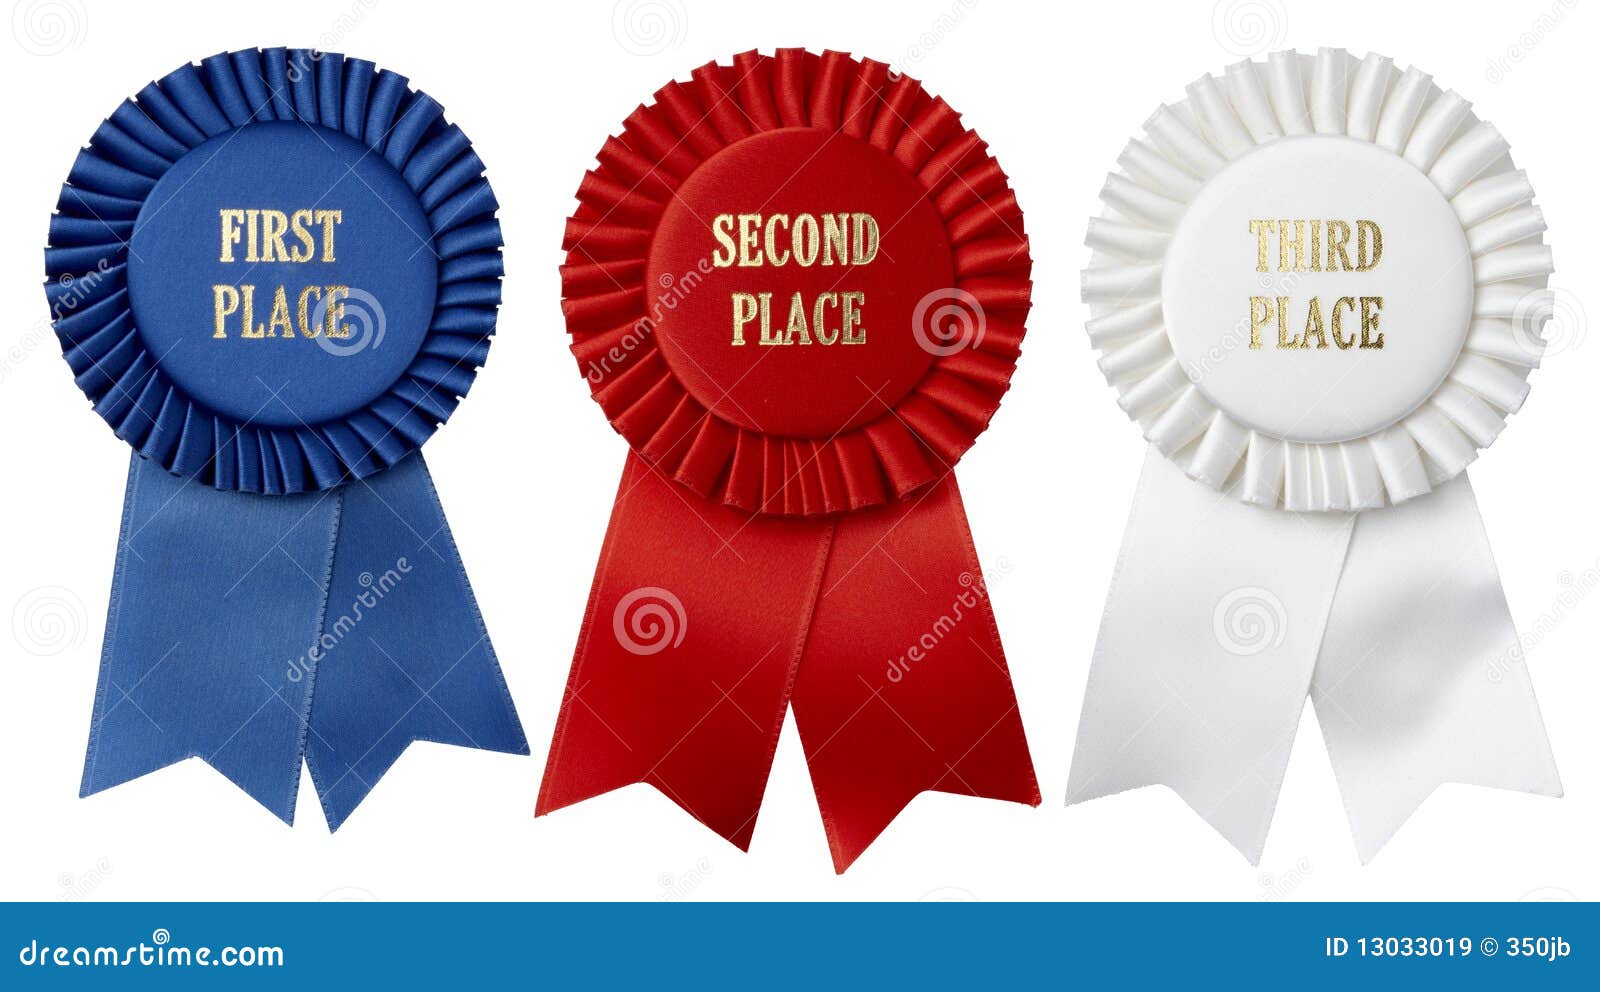 first-second-third-place-ribbons-royalty-free-stock-images-image